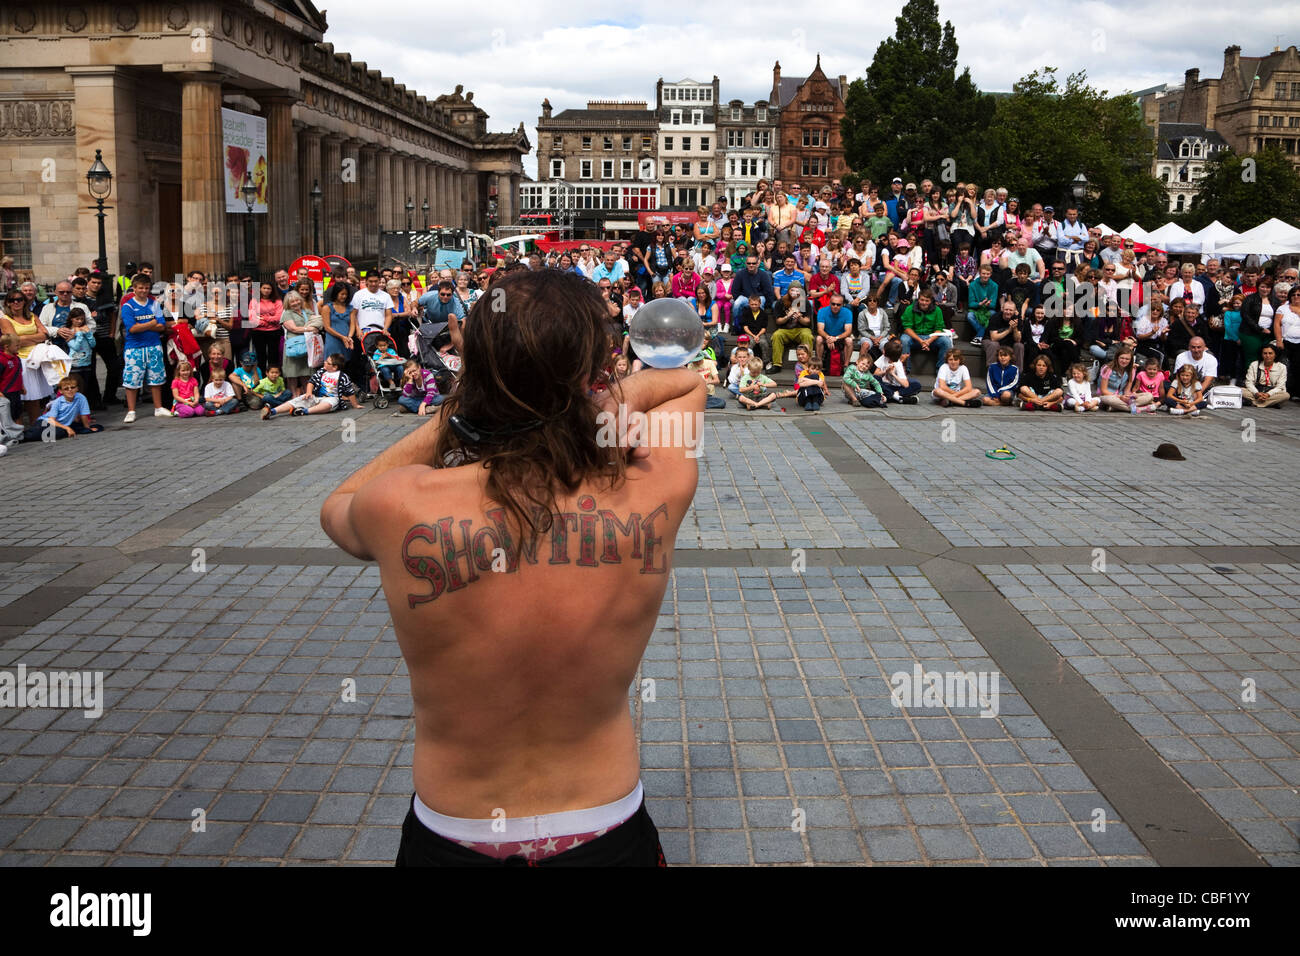 Street entertainer at The Edinburgh Fringe Festival with a tattoo of 'Showtime' on his back Stock Photo